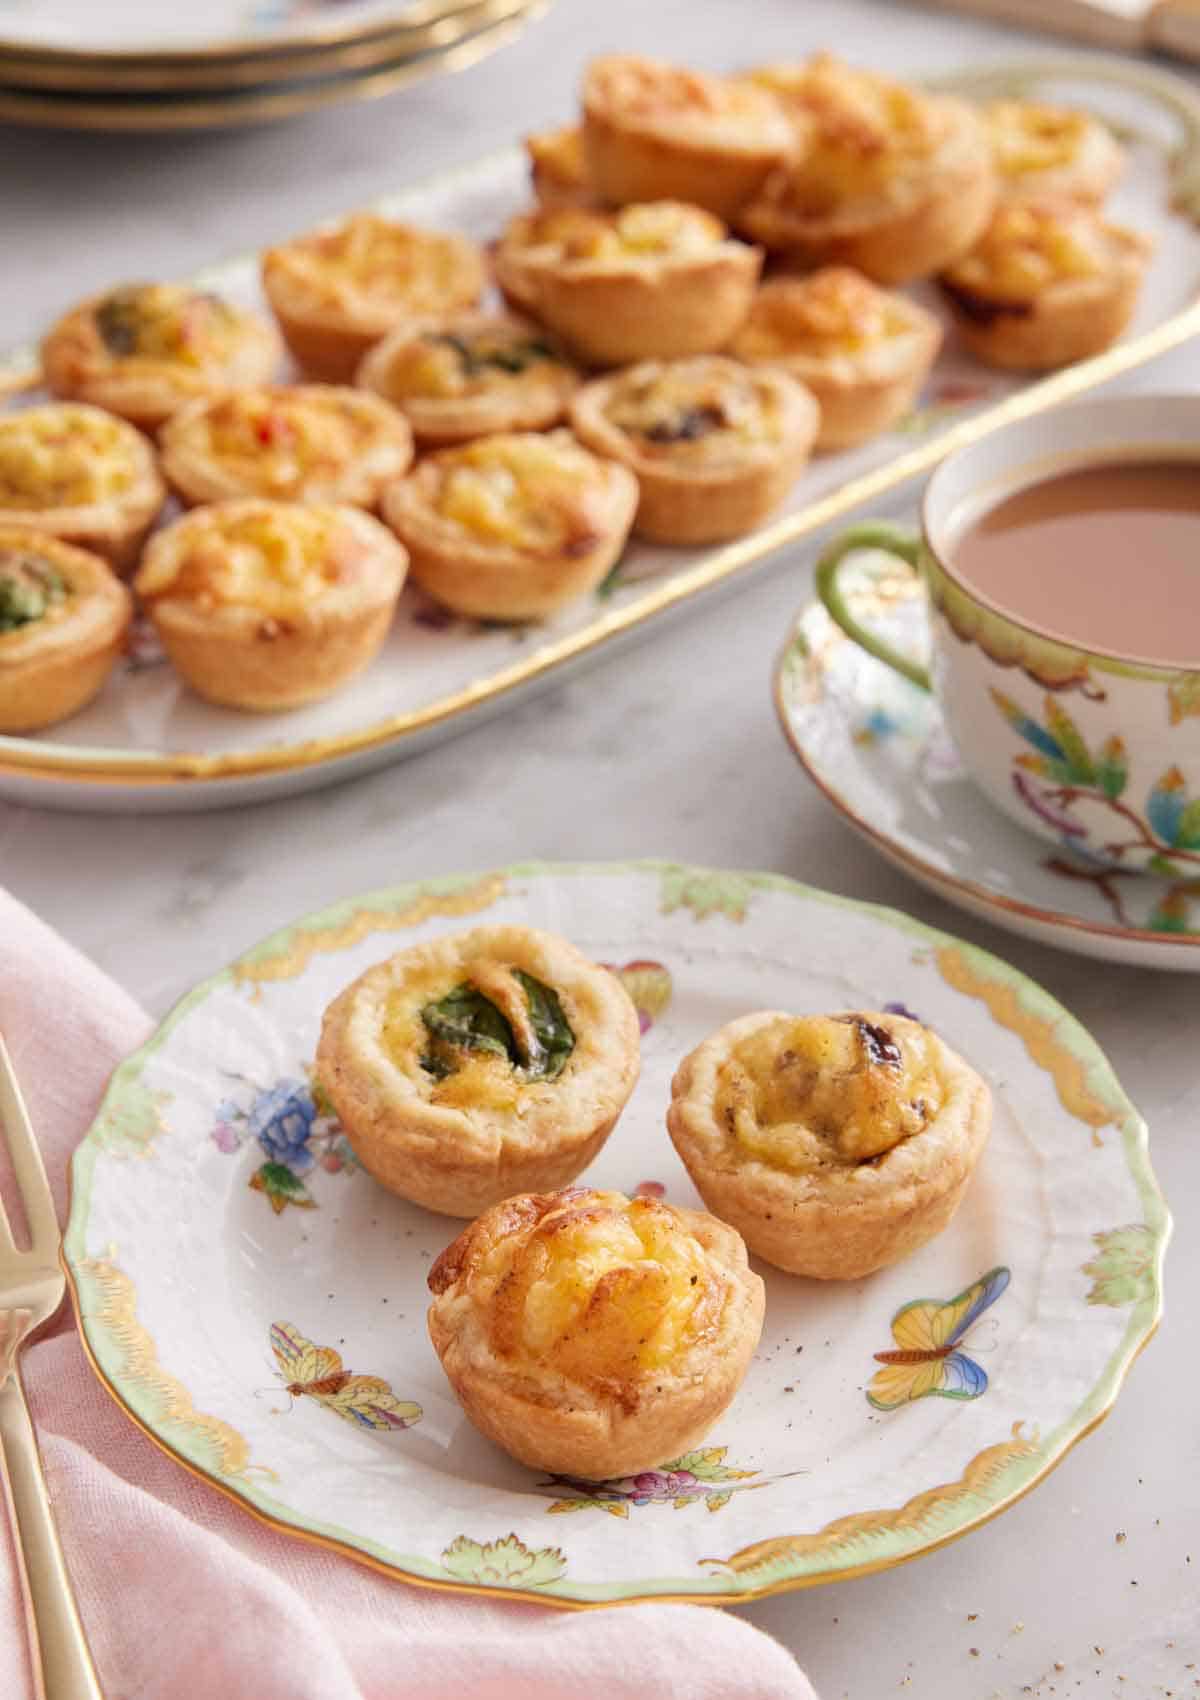 A plate with three mini quiches with a cup of coffee and a platter with additional quiches in the background.